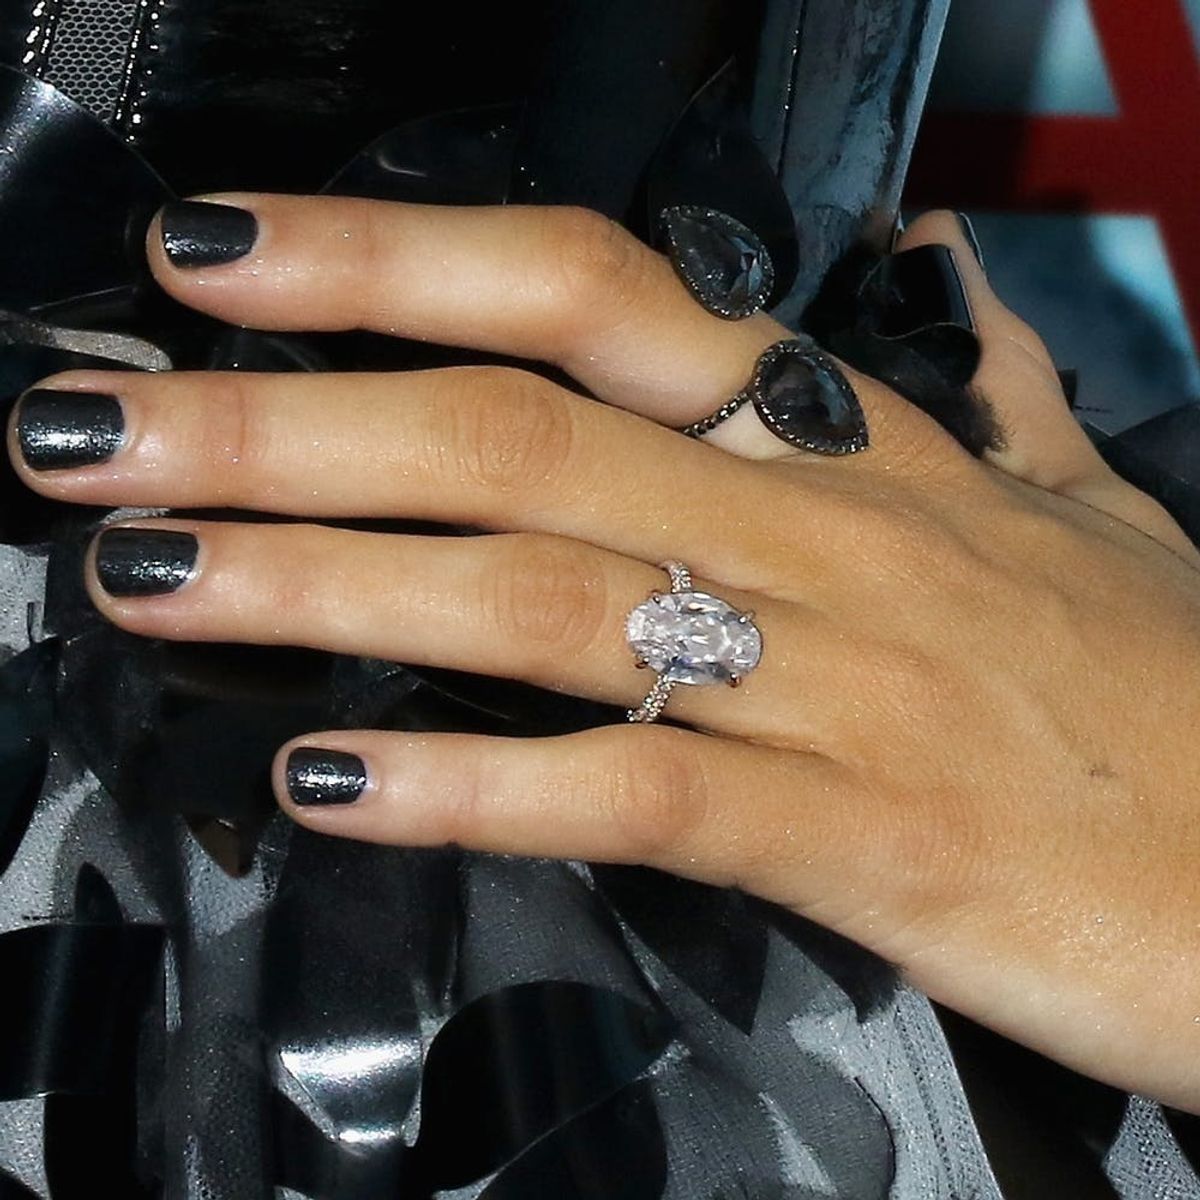 This Celeb’s Engagement Ring Is the Most Requested by Brides-to-Be